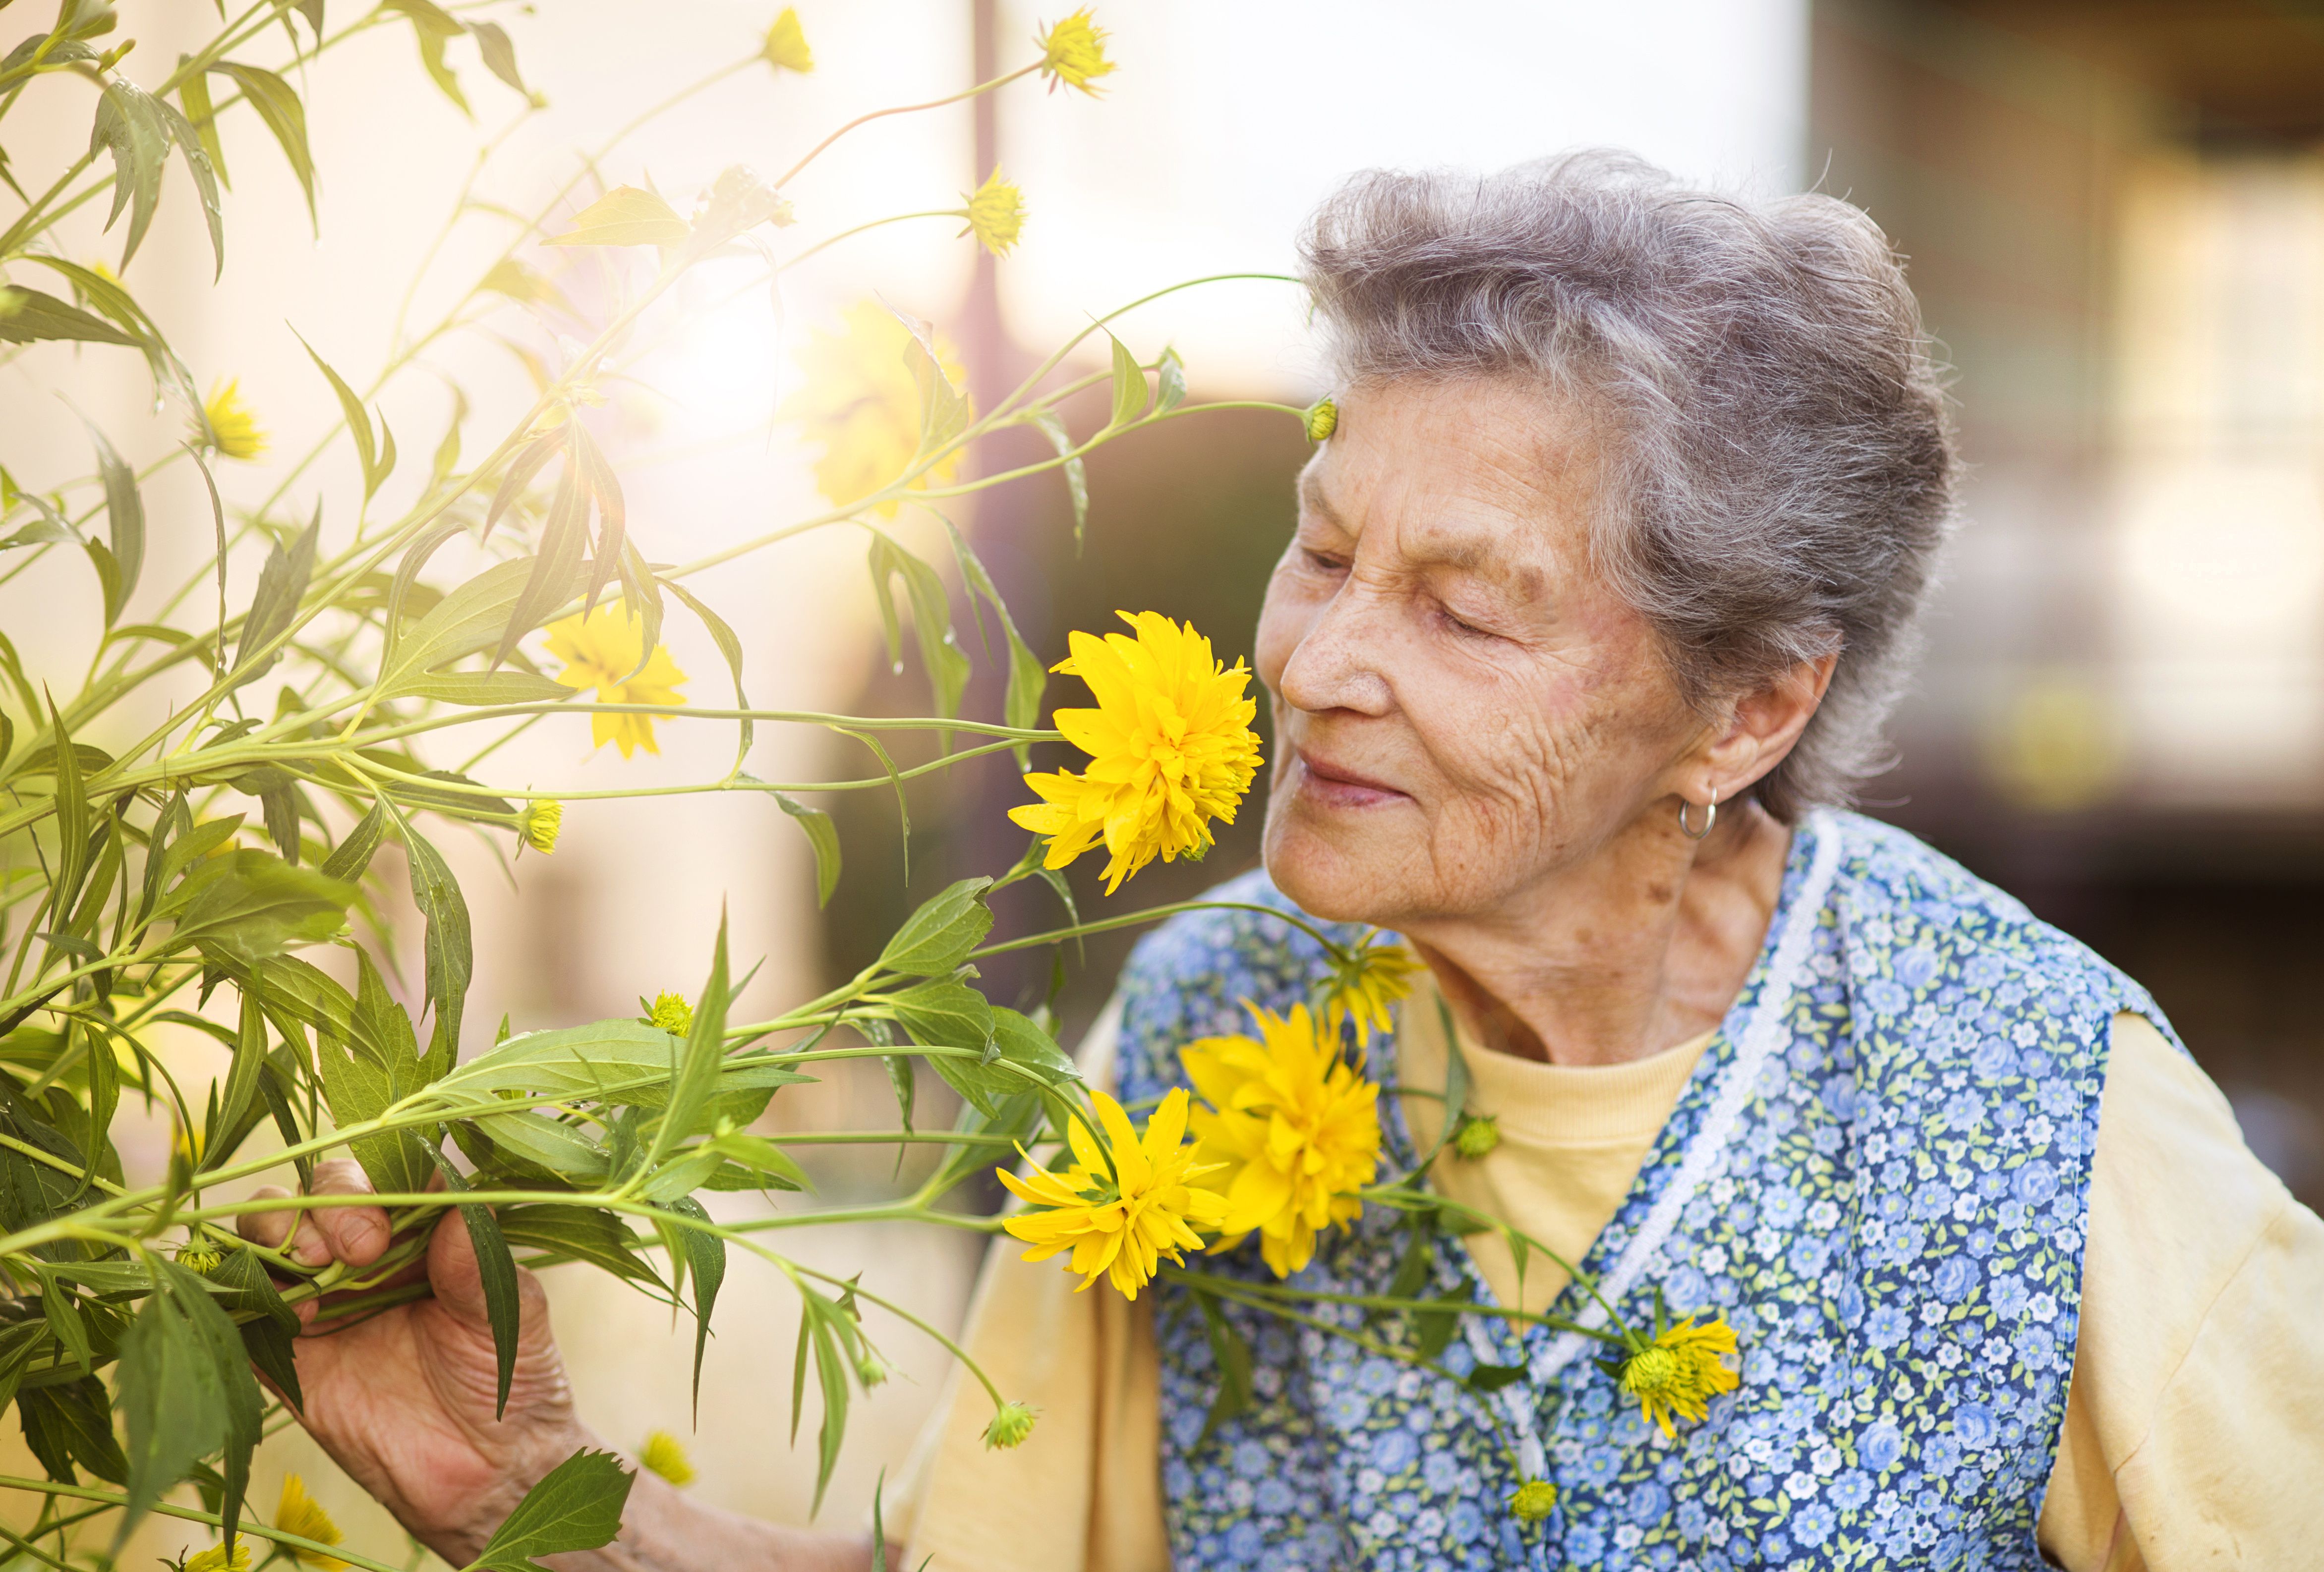 Older woman smelling flowers | Image credit: Halfpoint – stock.adobe.com